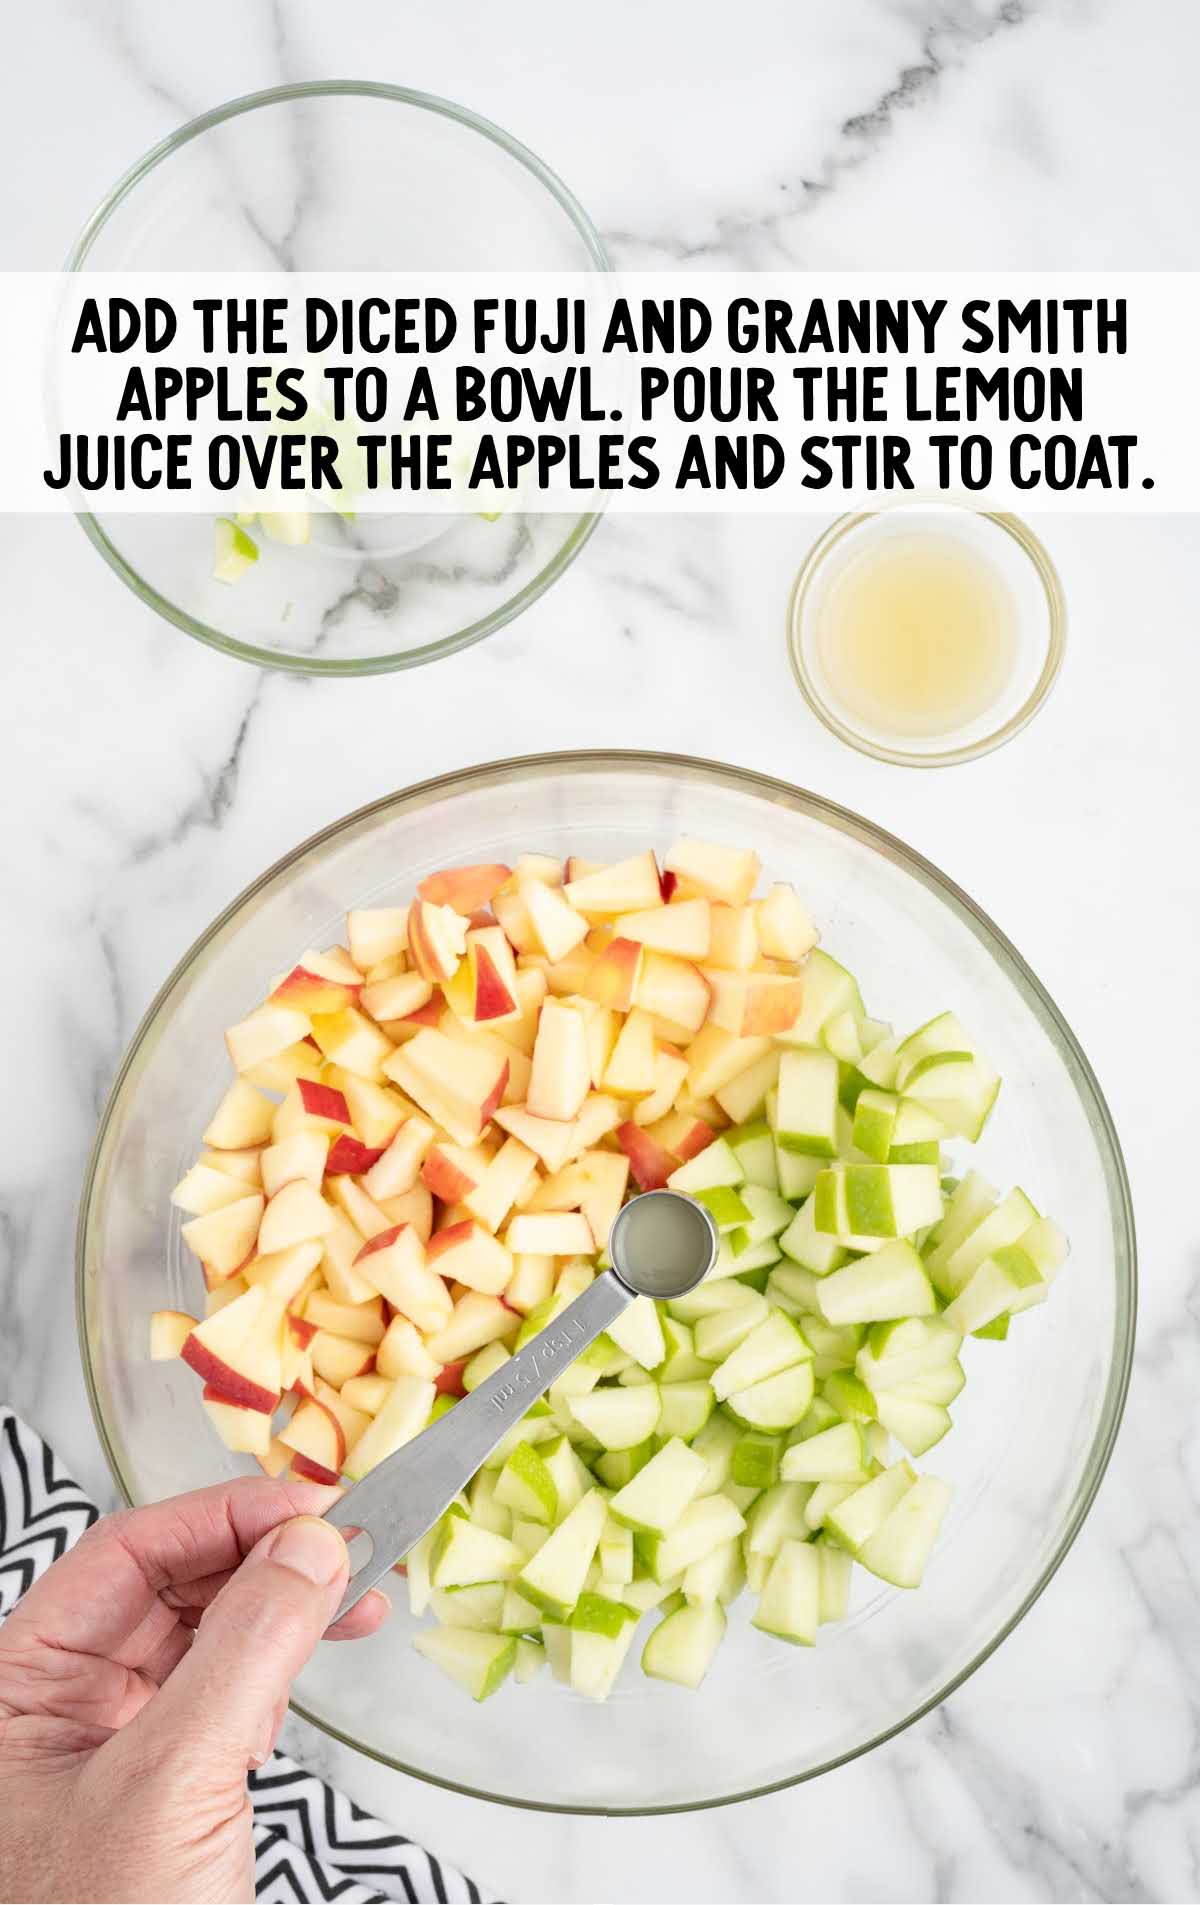 diced Fuji apples, diced Granny Smith apples, and lemon juice added to the bowl